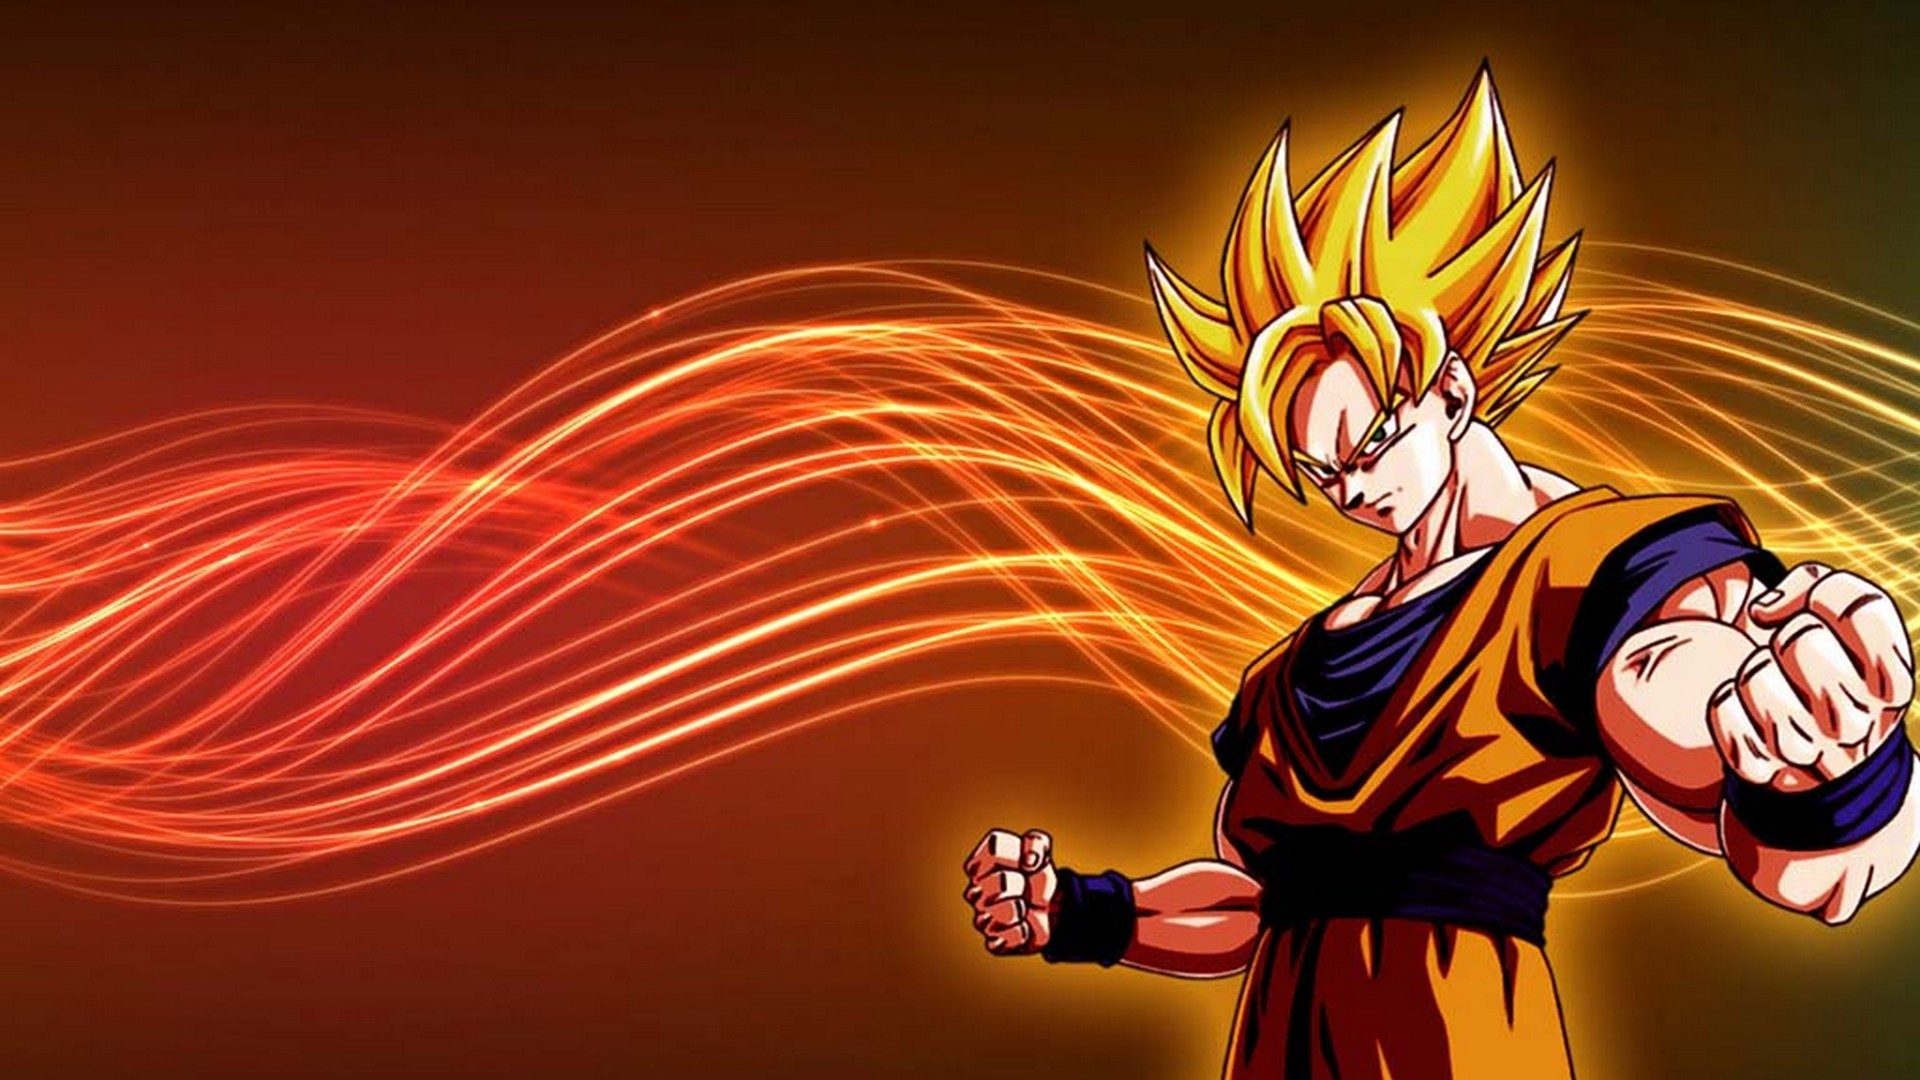 Goku Super Saiyan Desktop Backgrounds With Resolution 1920X1080 pixel. You can make this wallpaper for your Desktop Computer Backgrounds, Mac Wallpapers, Android Lock screen or iPhone Screensavers